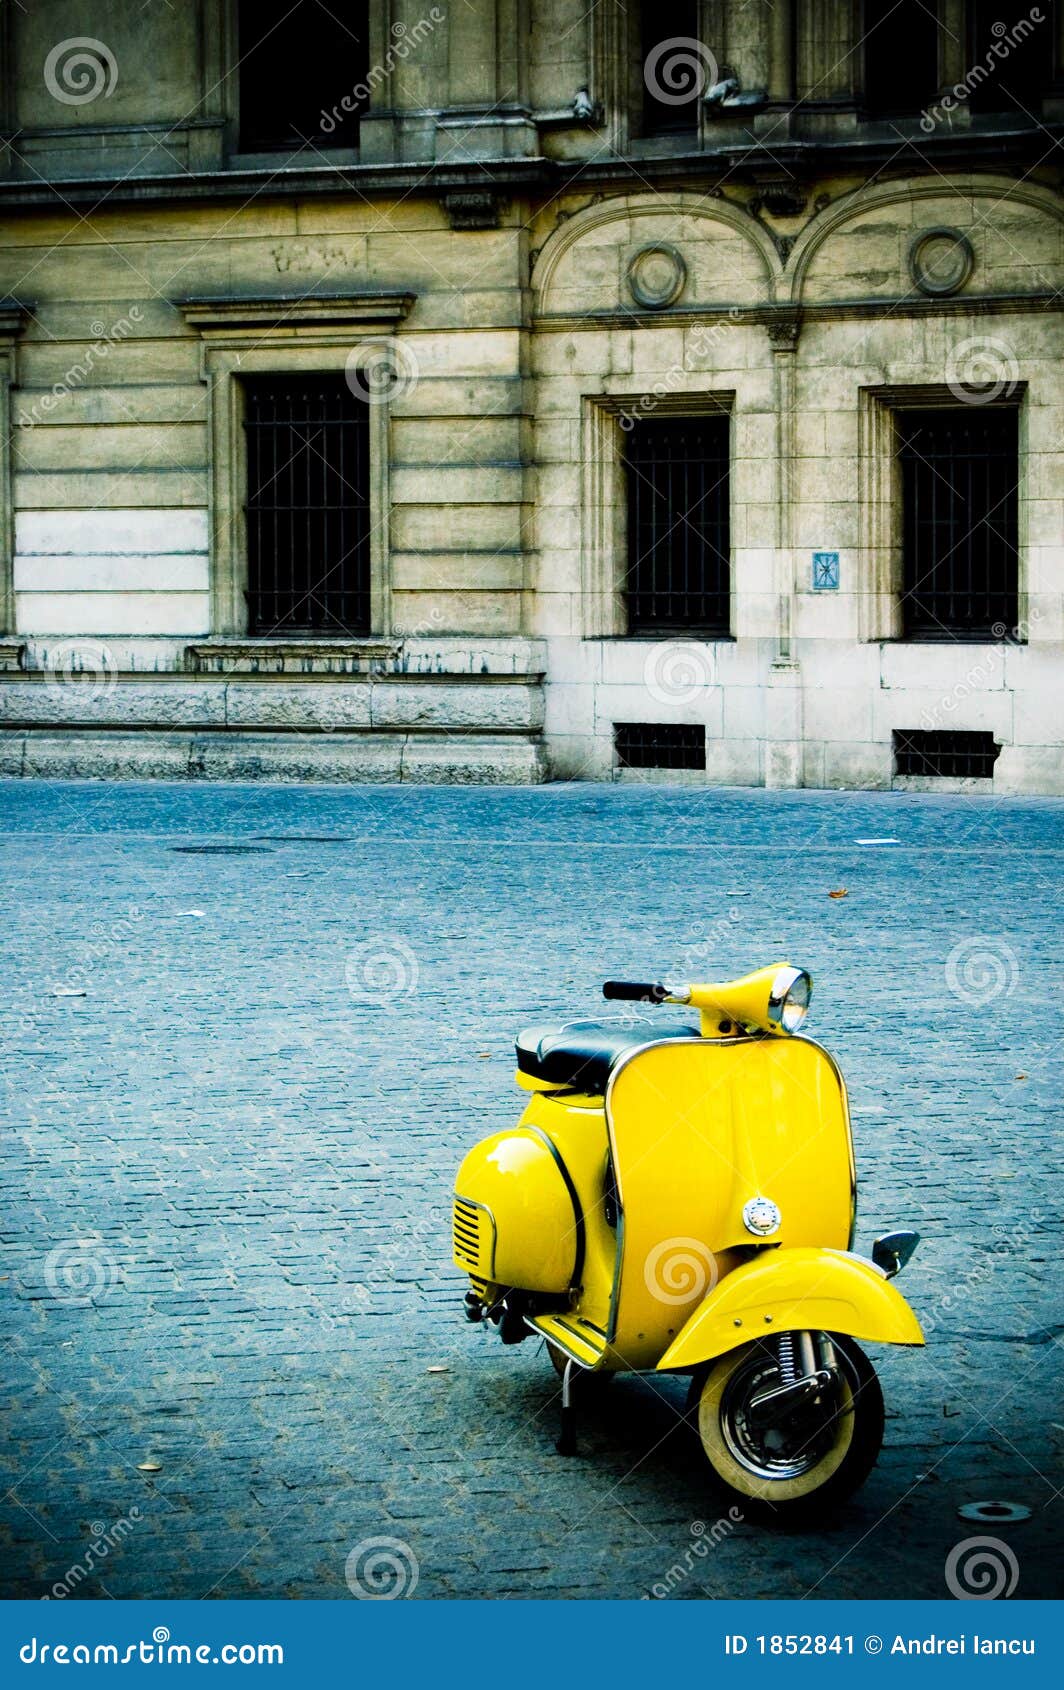 yellow scooter in plaza